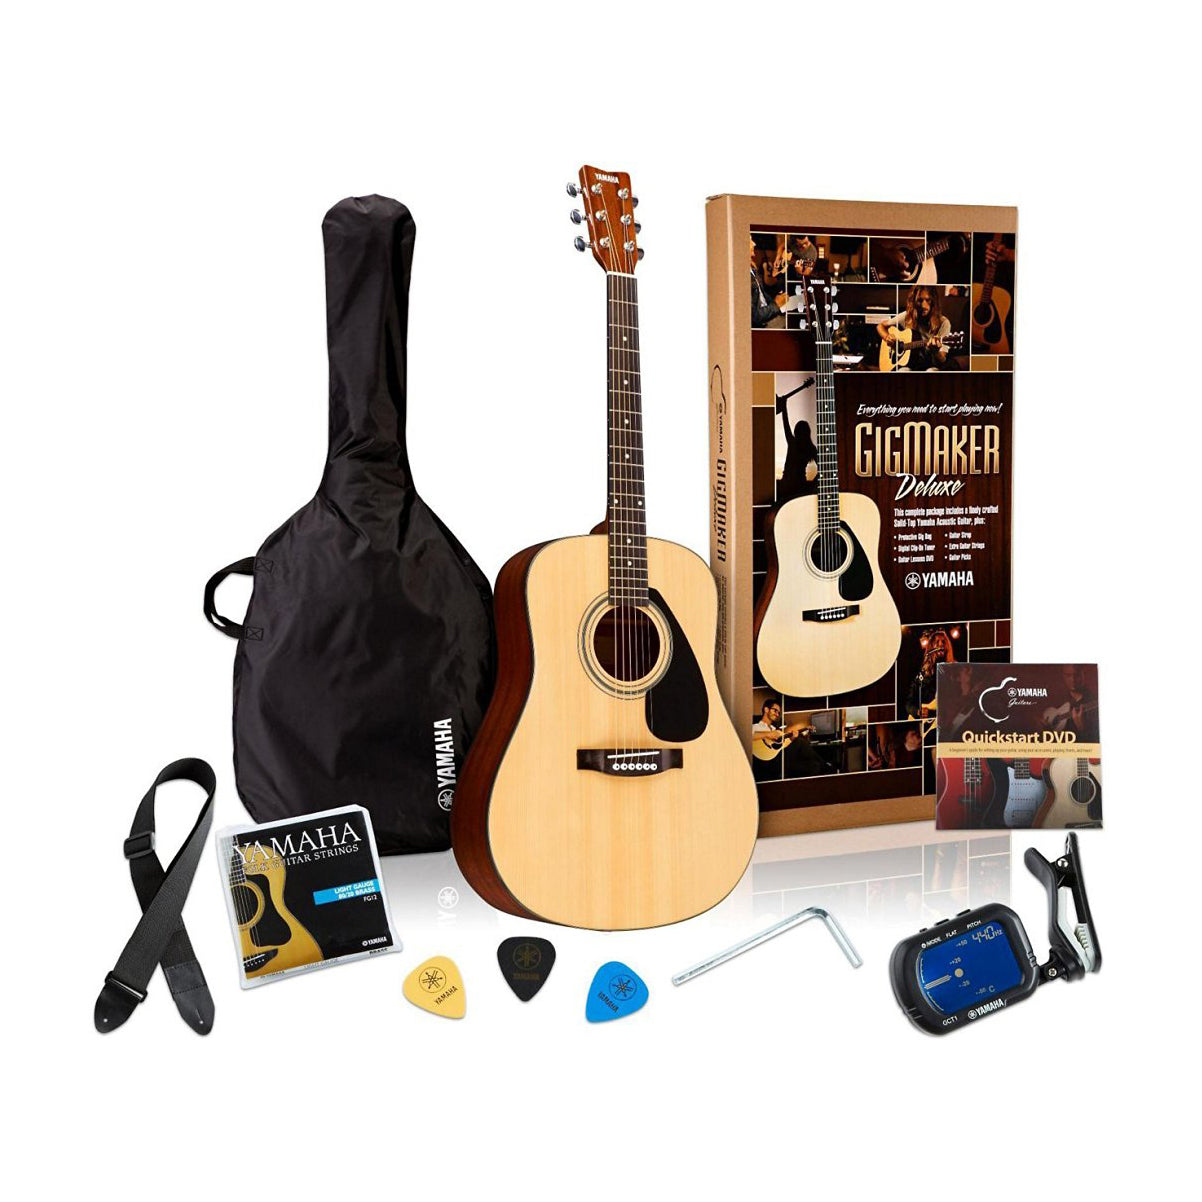 Yamaha Gigmaker Deluxe Acoustic Guitar Package with Gig Bag, Tuner,  Instructional DVD, Strap, Strings, and Picks - Natural Finish